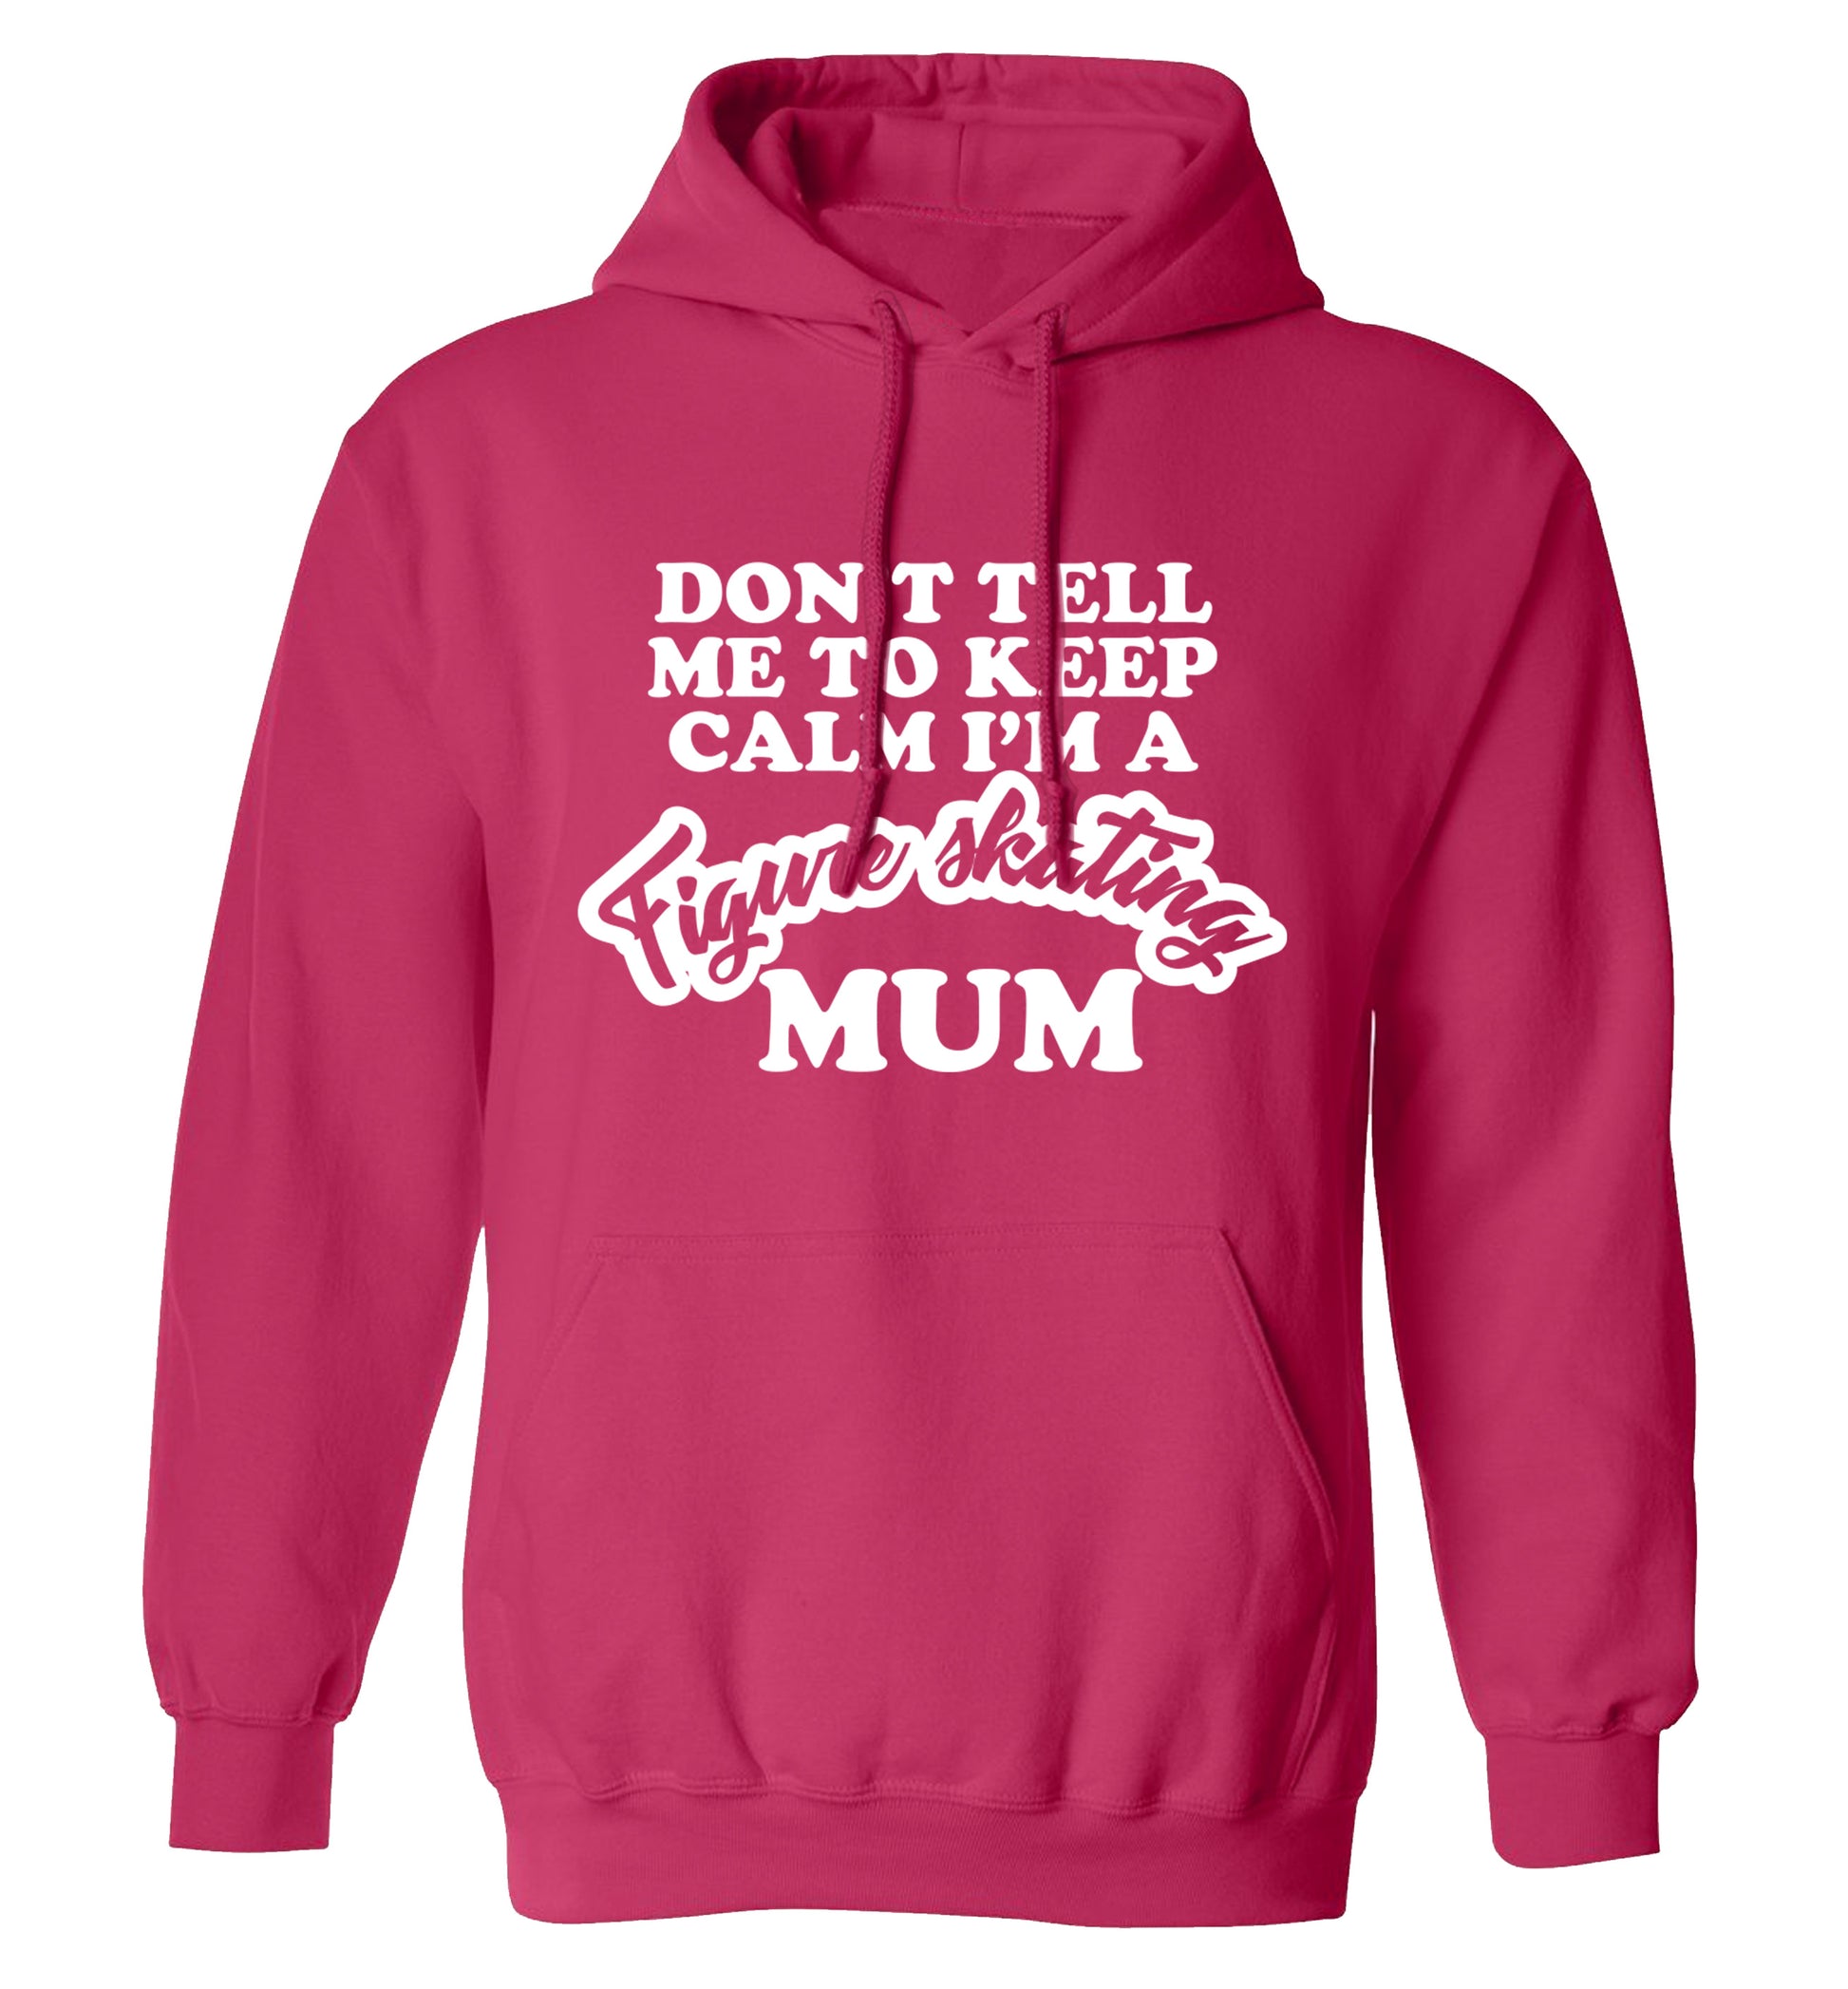 Don't tell me to keep calm I'm a figure skating mum adults unisexpink hoodie 2XL